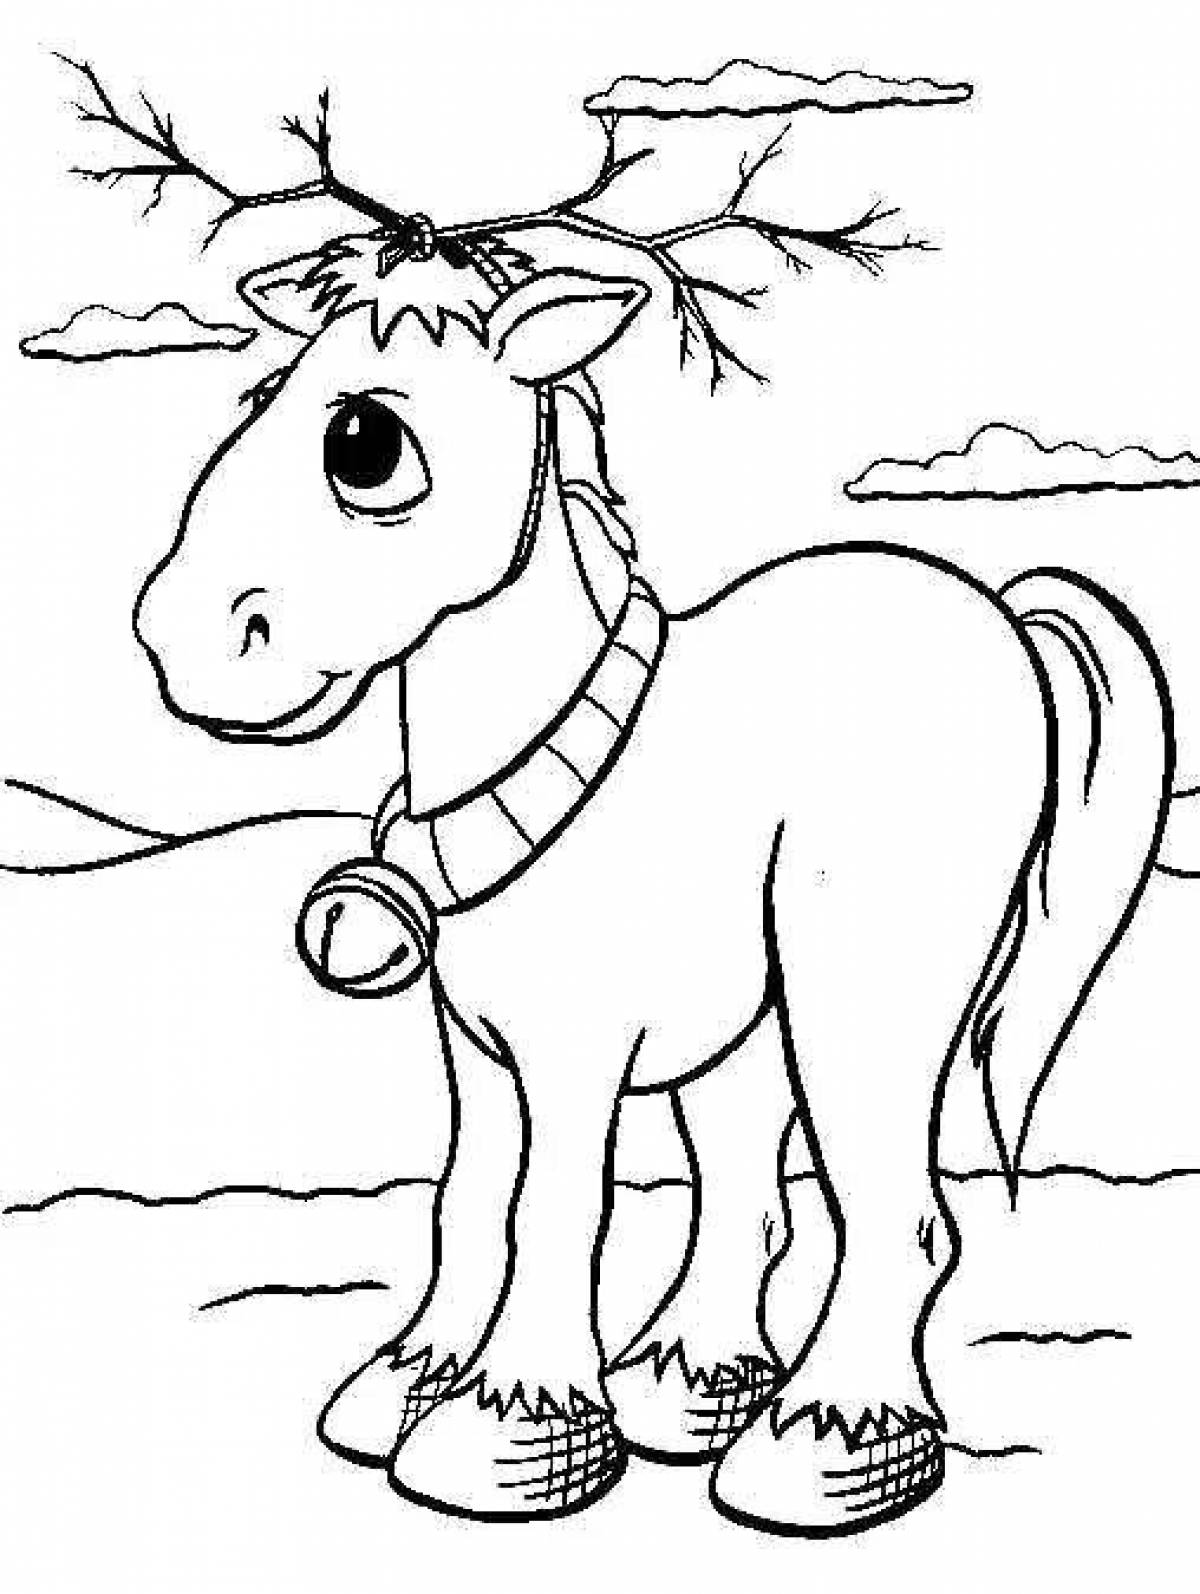 Colourful lanky horse coloring page